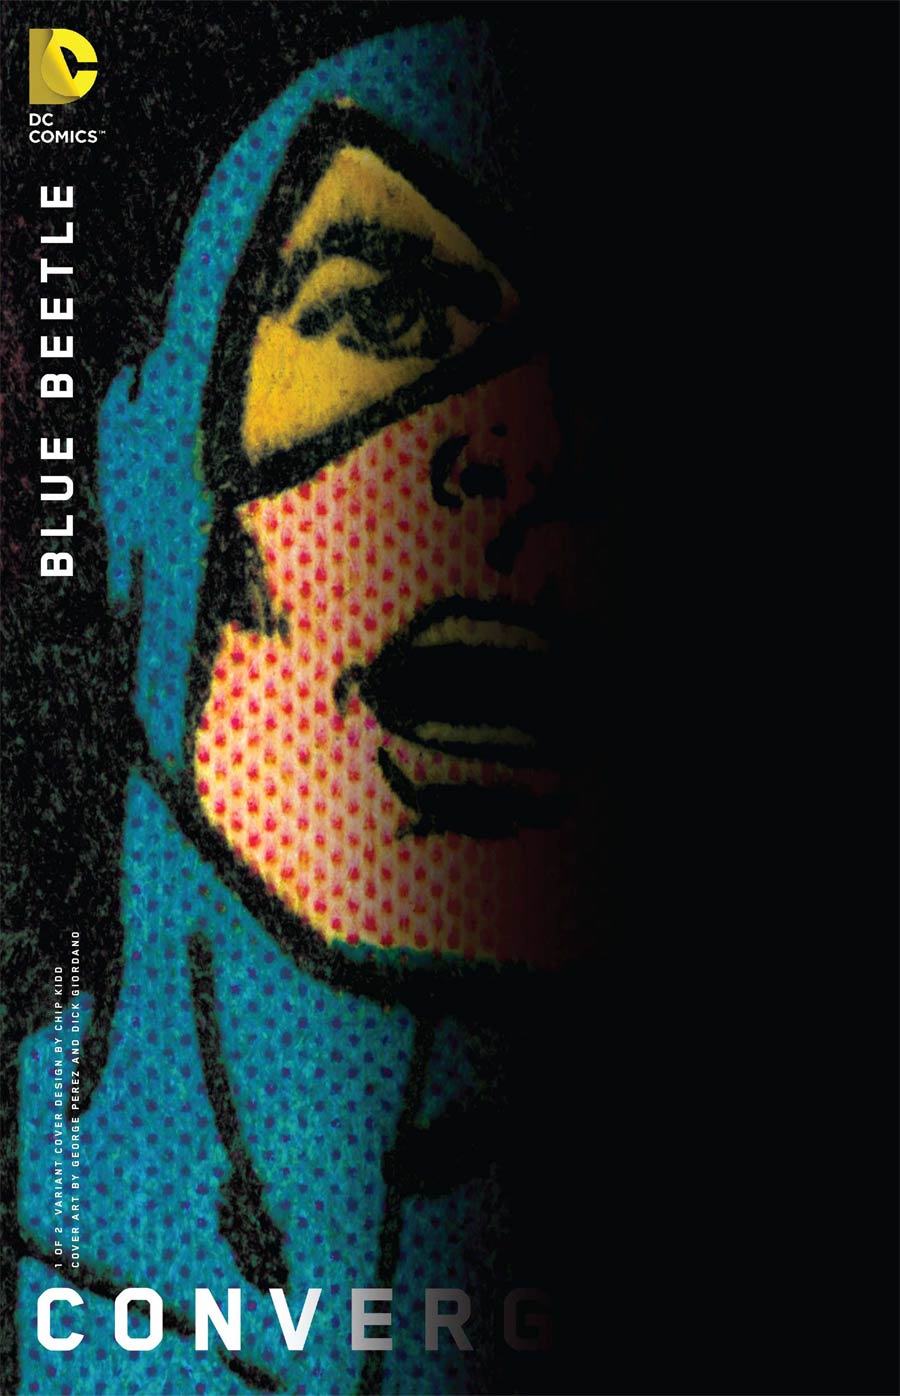 Convergence Blue Beetle #1 Cover B Variant Chip Kidd Cover